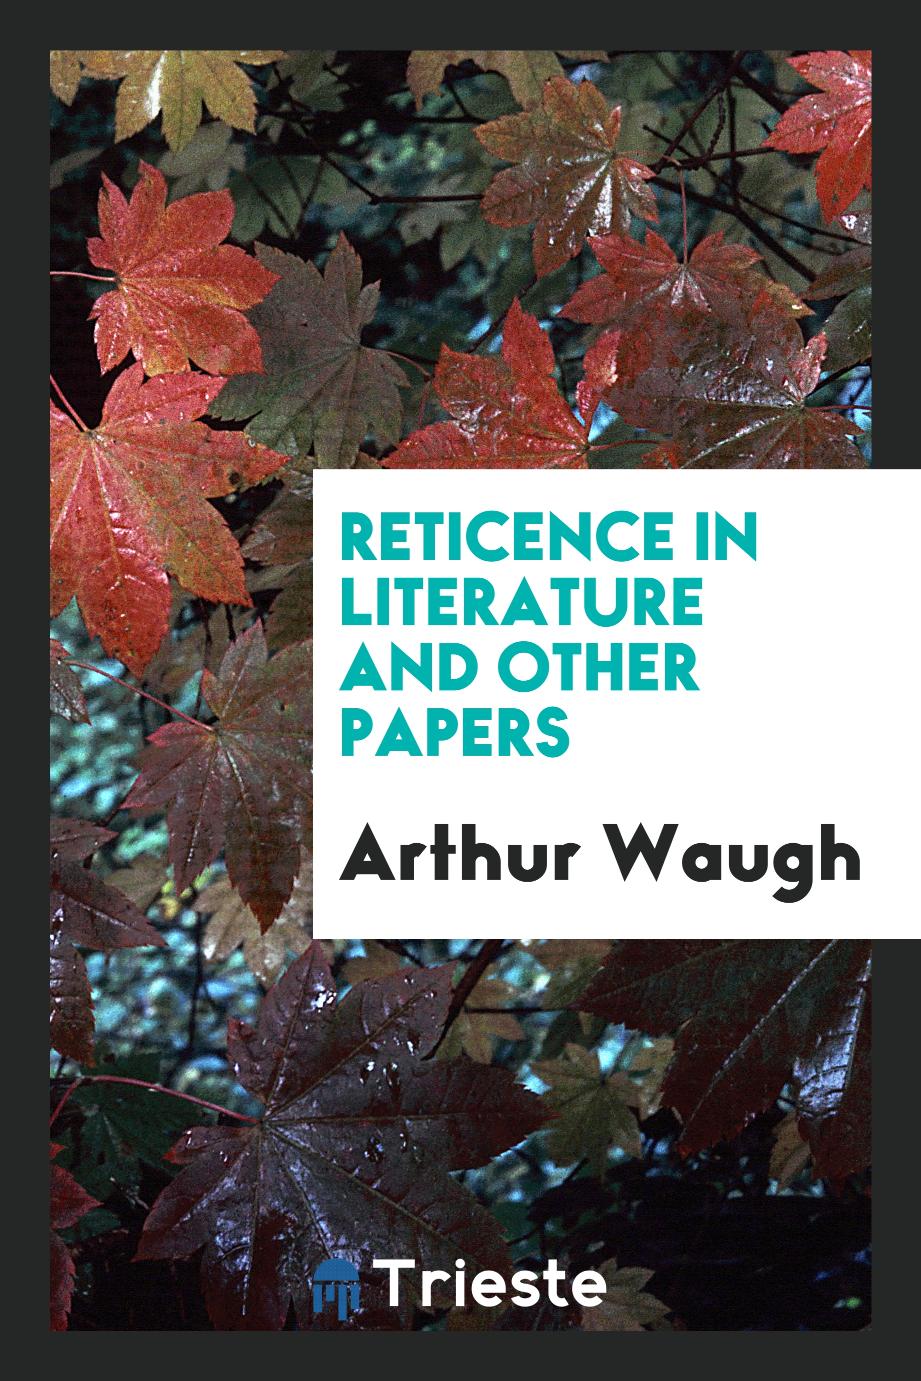 Reticence in literature and other papers